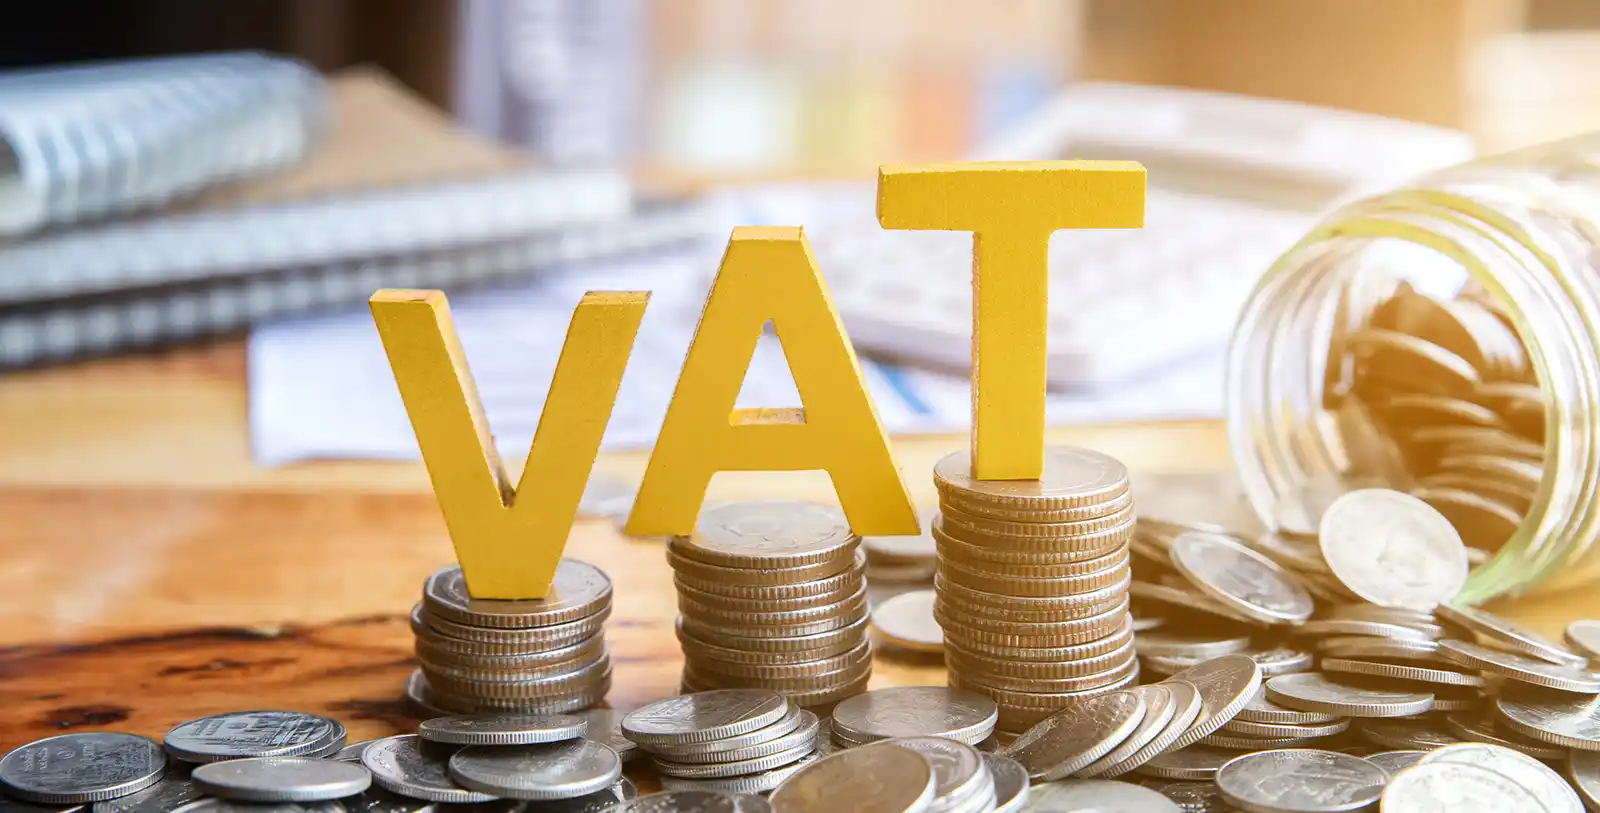 KDV is the Turkish term for VAT